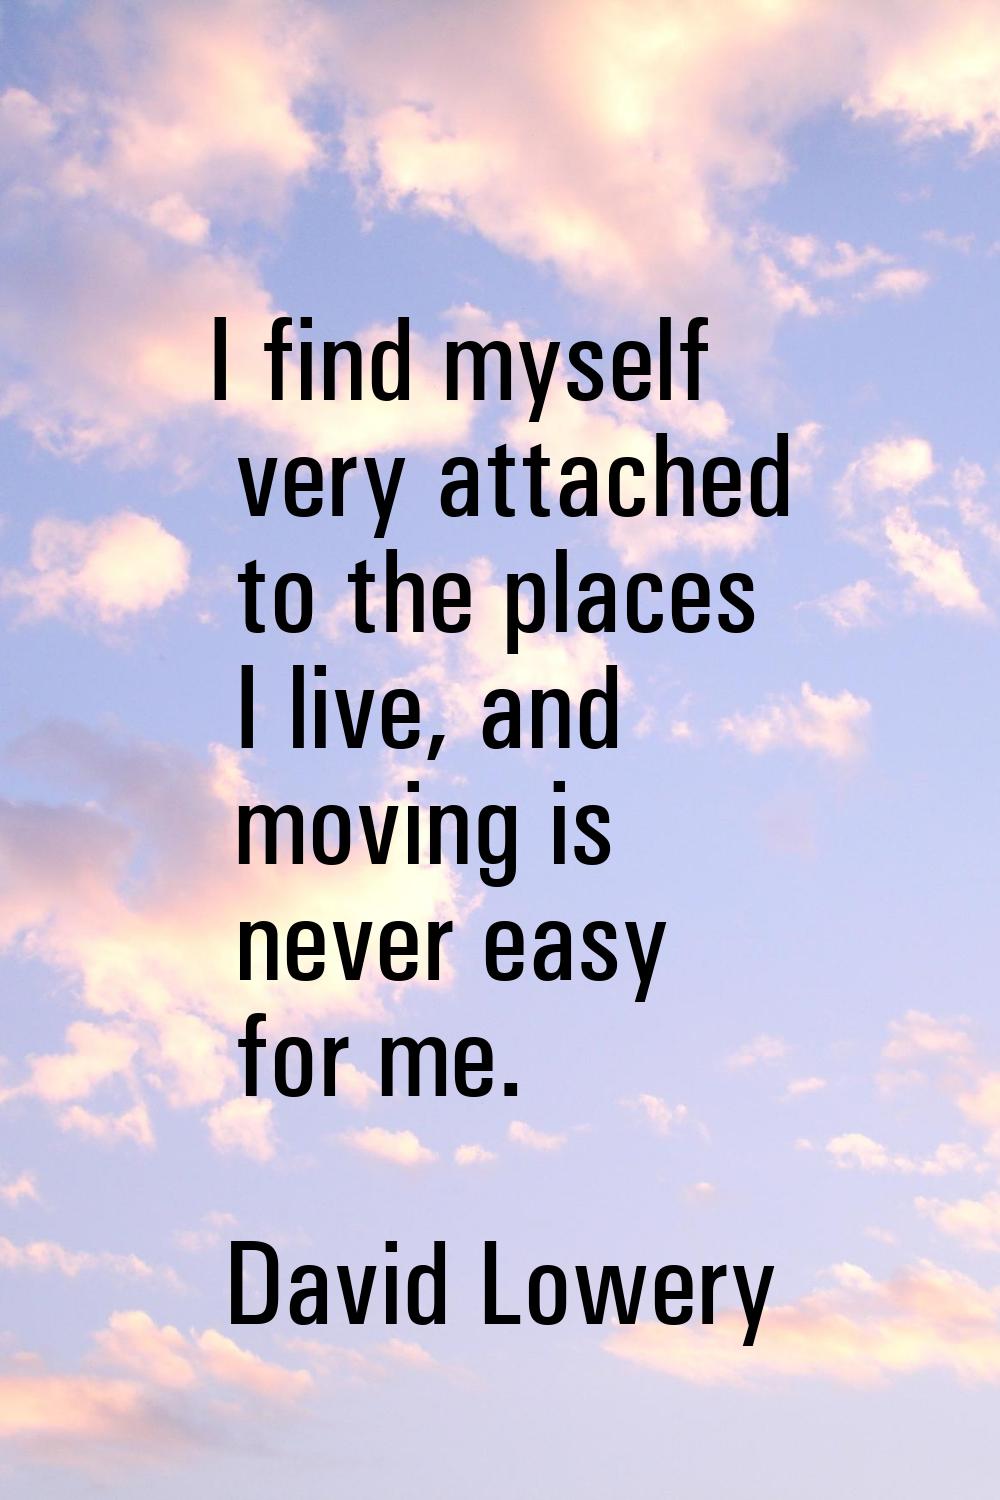 I find myself very attached to the places I live, and moving is never easy for me.